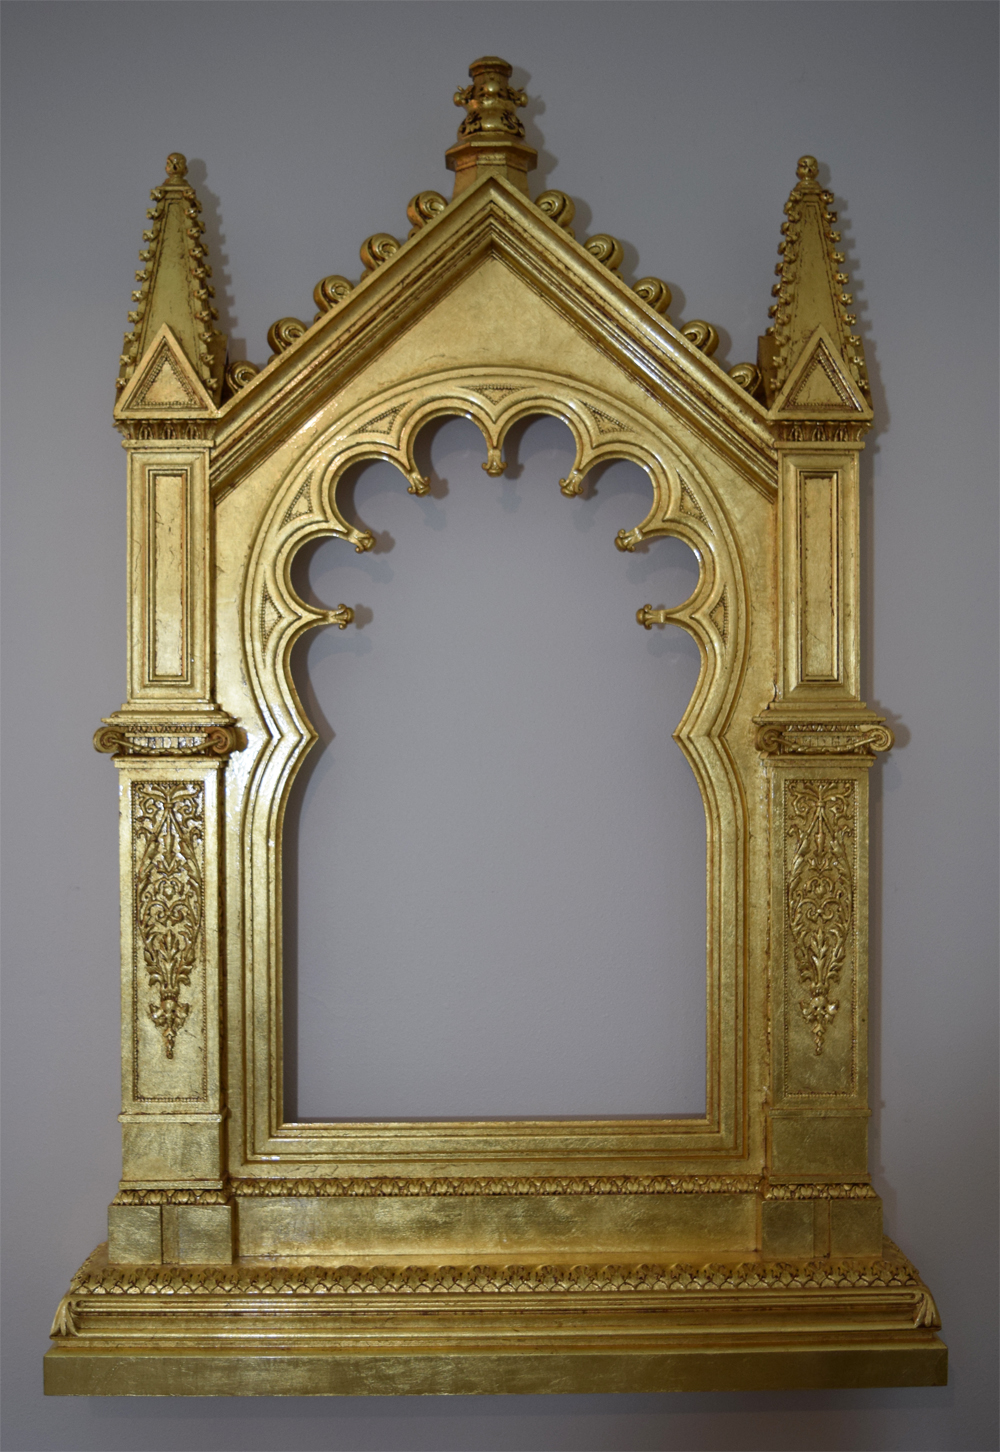  The finished gilded frame. The gold leaf has been toned down with a thin layer of oil paint, and clear coat applied. 